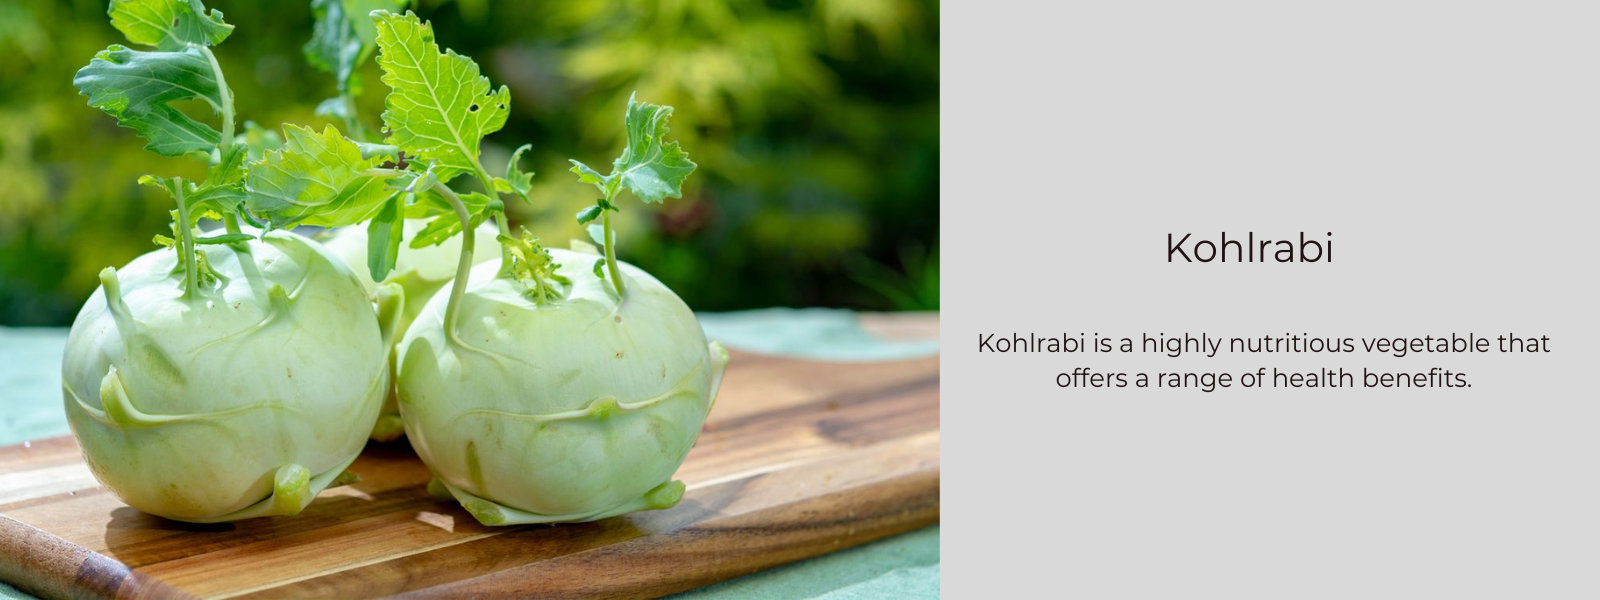 Kohlrabi - Health Benefits, Uses and Important Facts